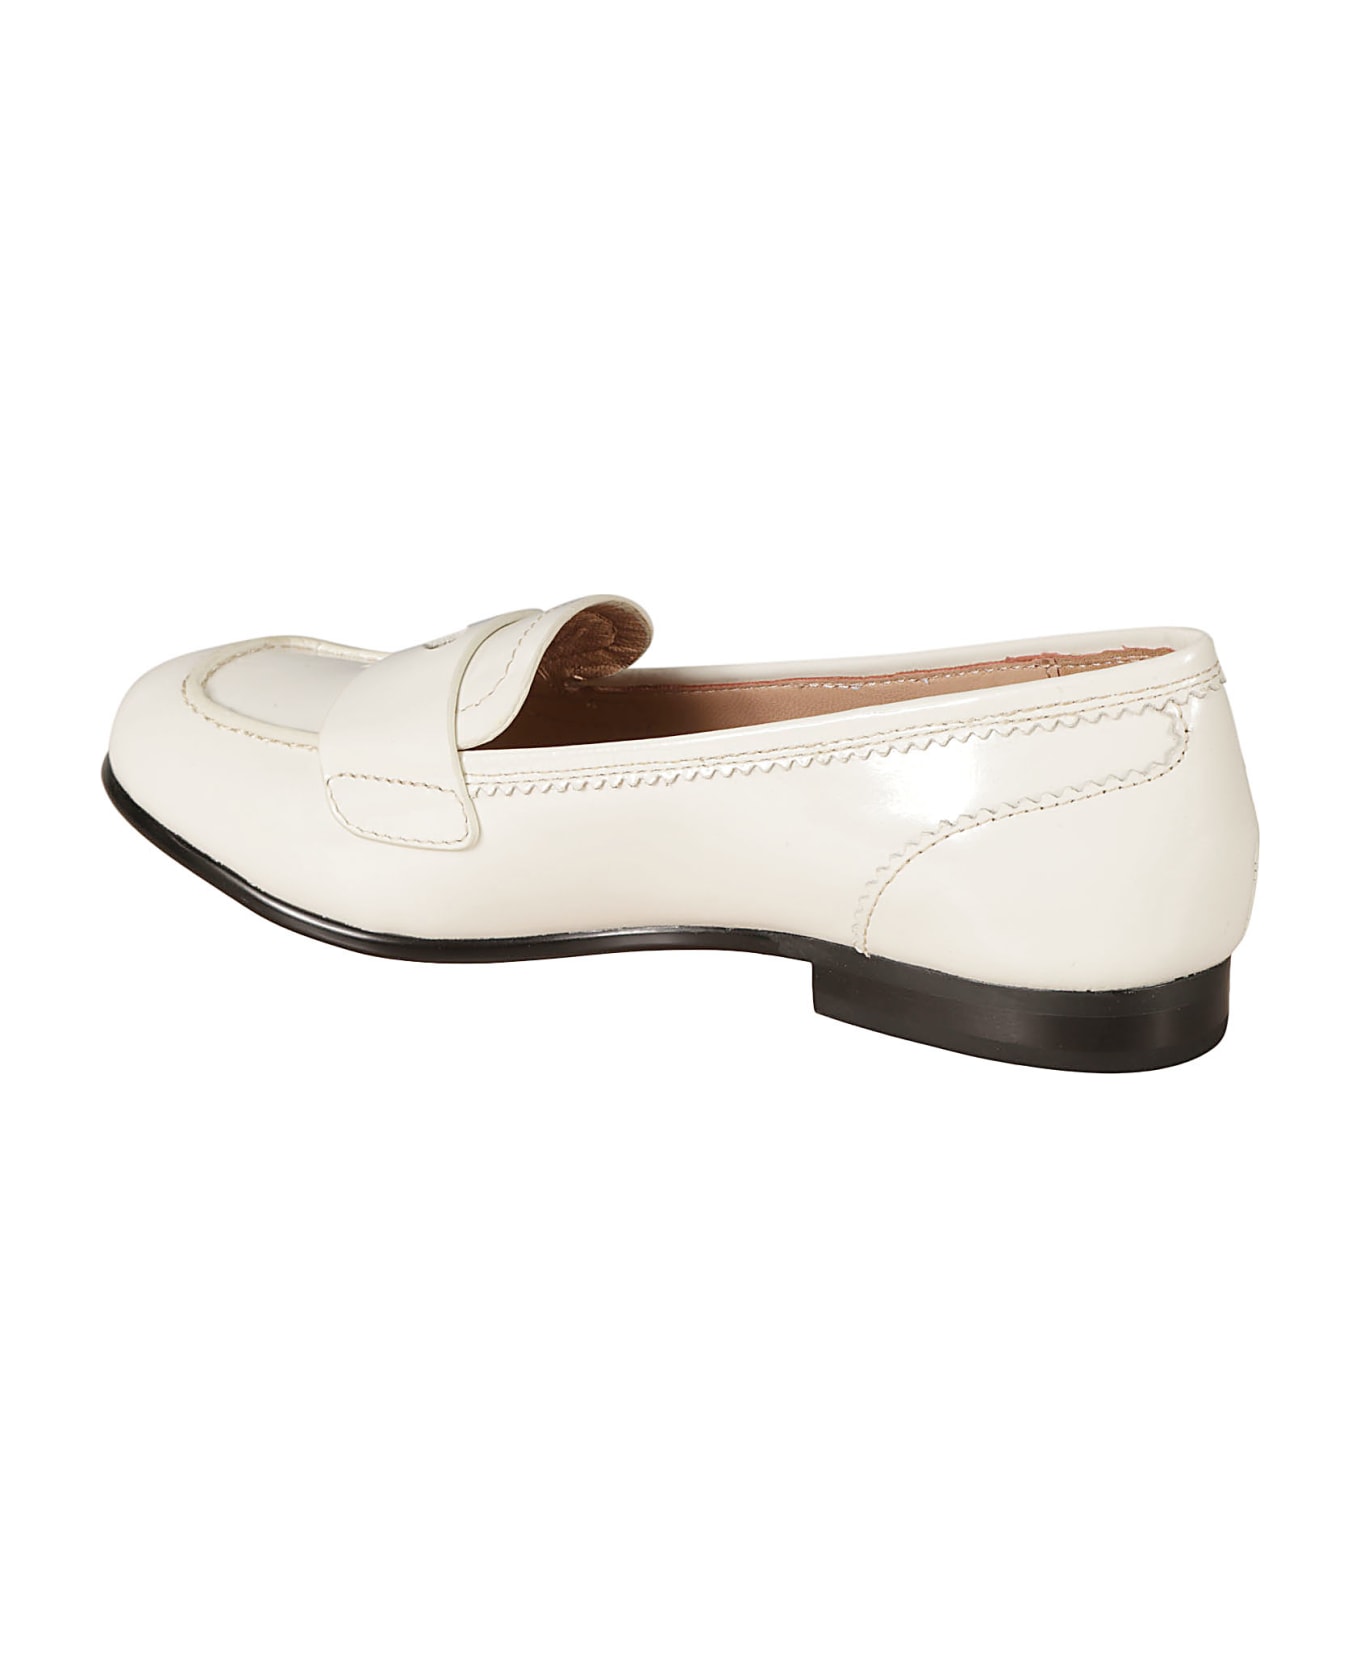 Love Moschino College15 Vernice Loafers - Latte